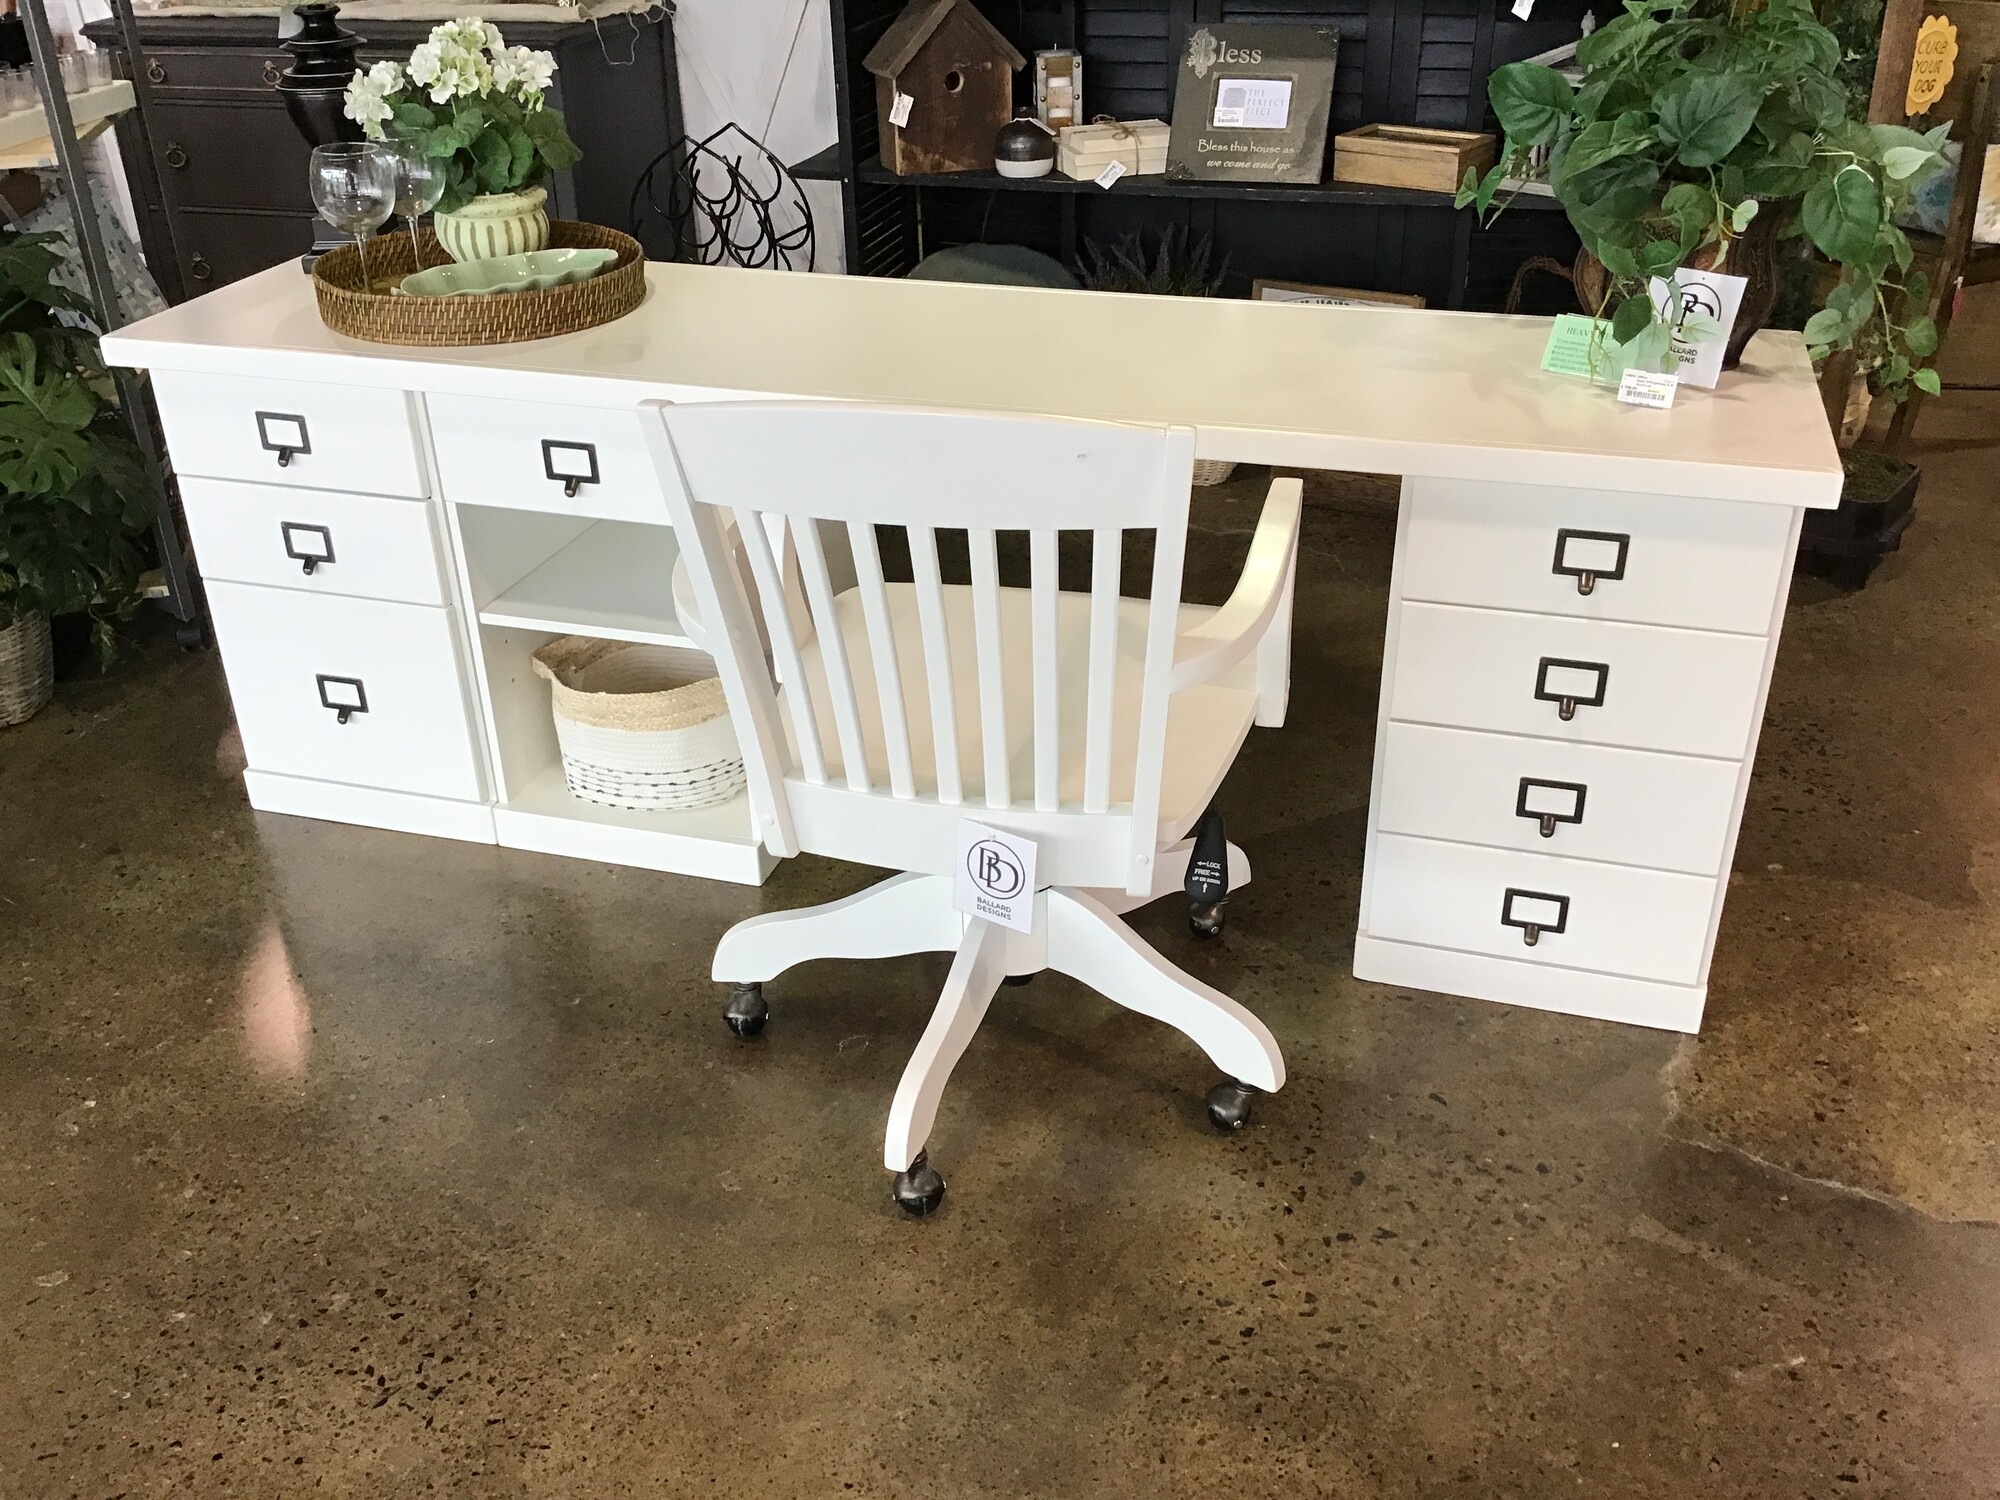 This modular desk system from Ballard Designs comes from the Original Home Office collection. It comes with an 82 inch table top (not secured to the cabinets - it just sits on top of them), 3 cabinets and a desk chair. The cabinets are all different and set up as follows:
- 4 Small Drawers
- 1 Small Drawer & Open Cabinet with 1 Shelf
- 2 Small Drawers & 1 File Drawer
This set is currently sold on the Ballard Design website. The tabletop does have 2 imperfections on it.

Desk Dimensions - 82 in x 21 in x 28 in
Chair Dimensions - 22 in x 24 in x 34 in